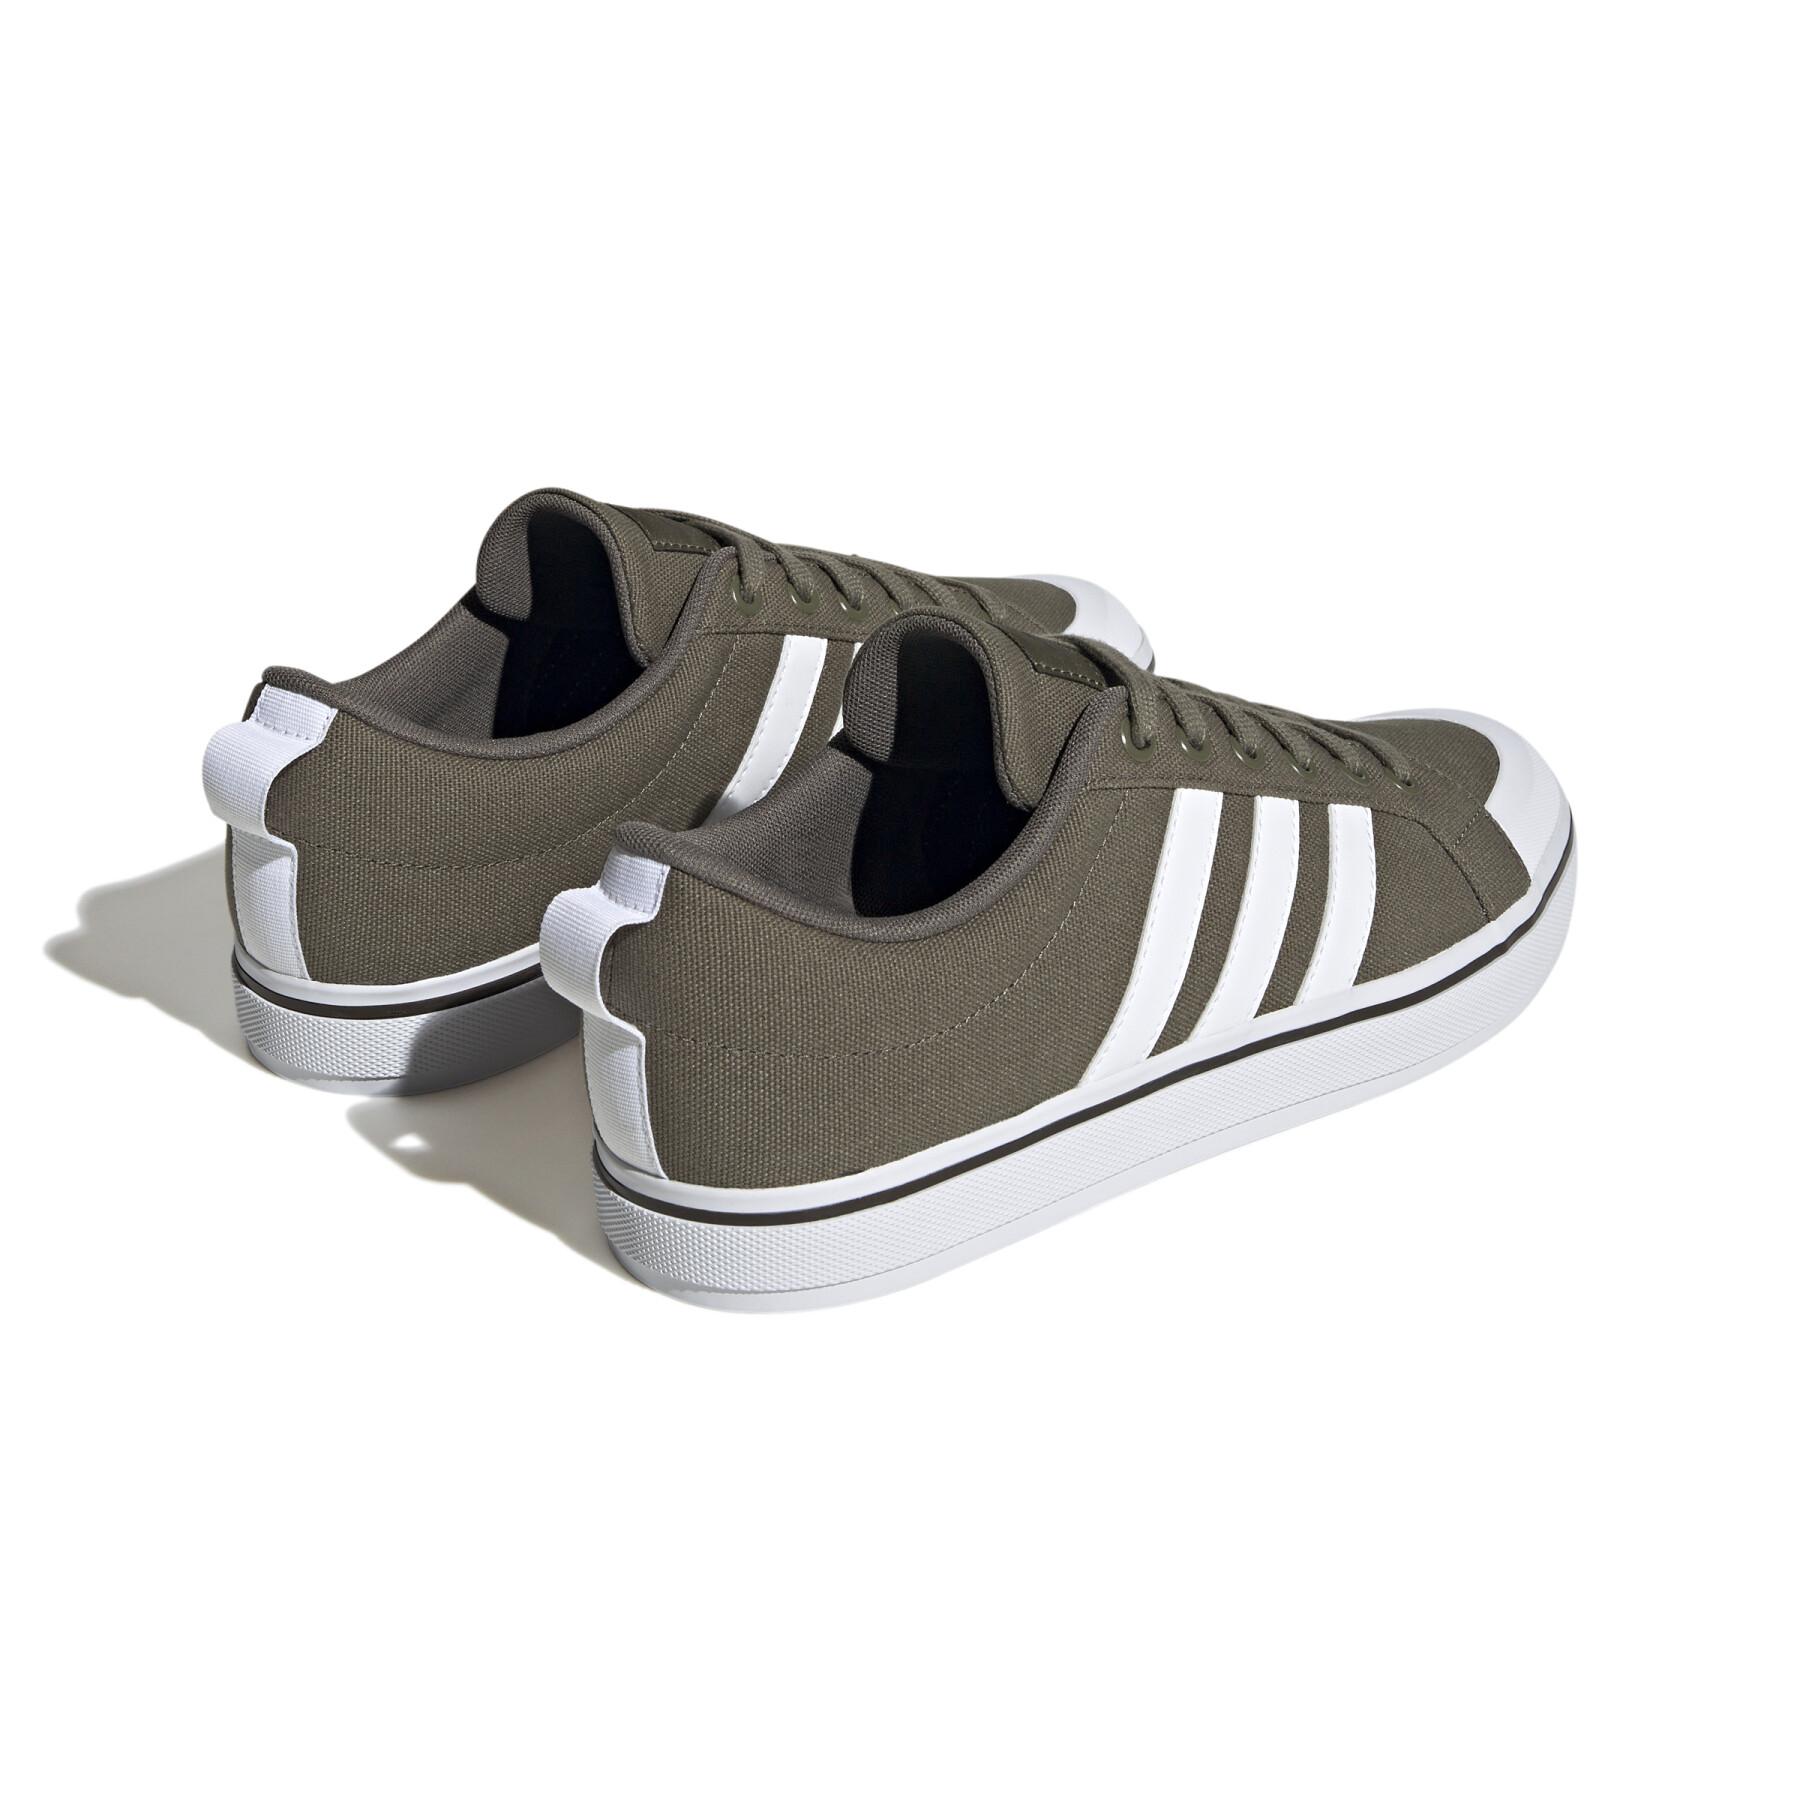 Sneakers adidas Vl Court 2.0